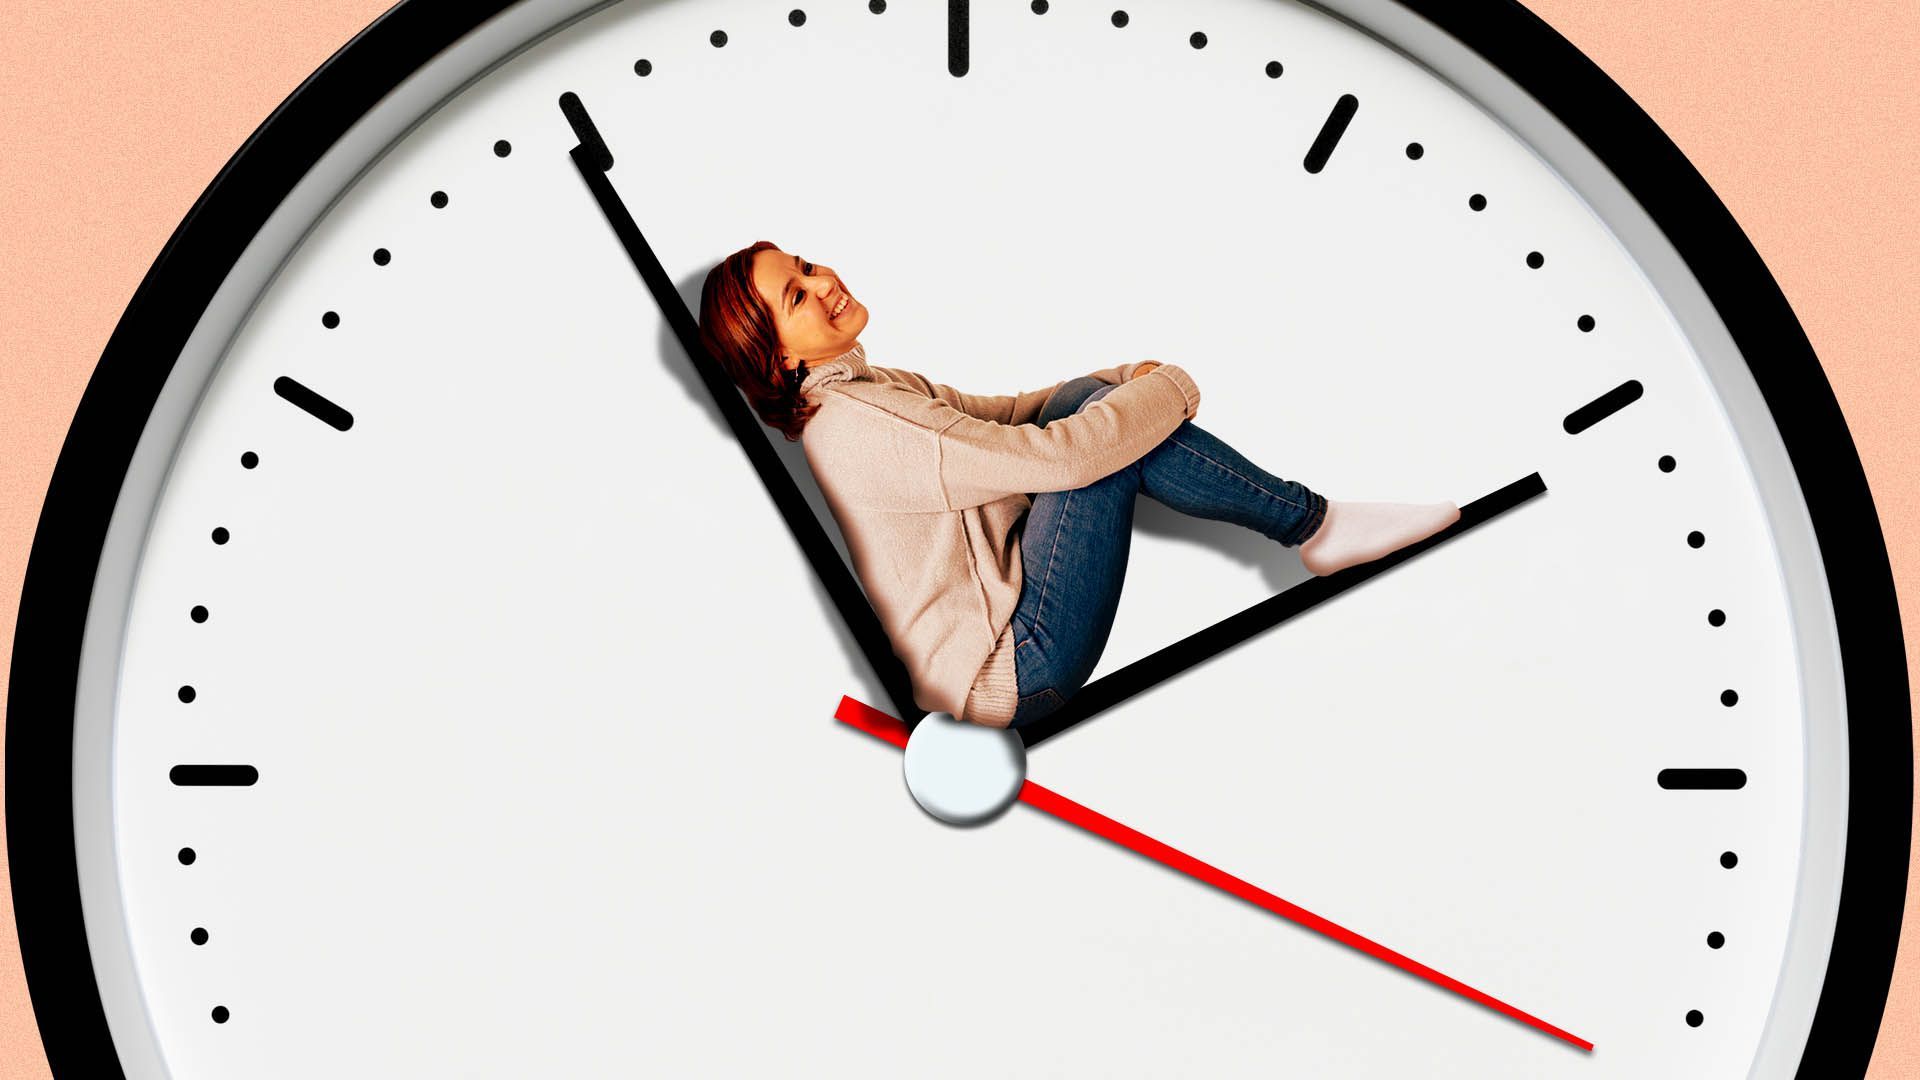 Illustration of a woman reclining on the hands of a clock